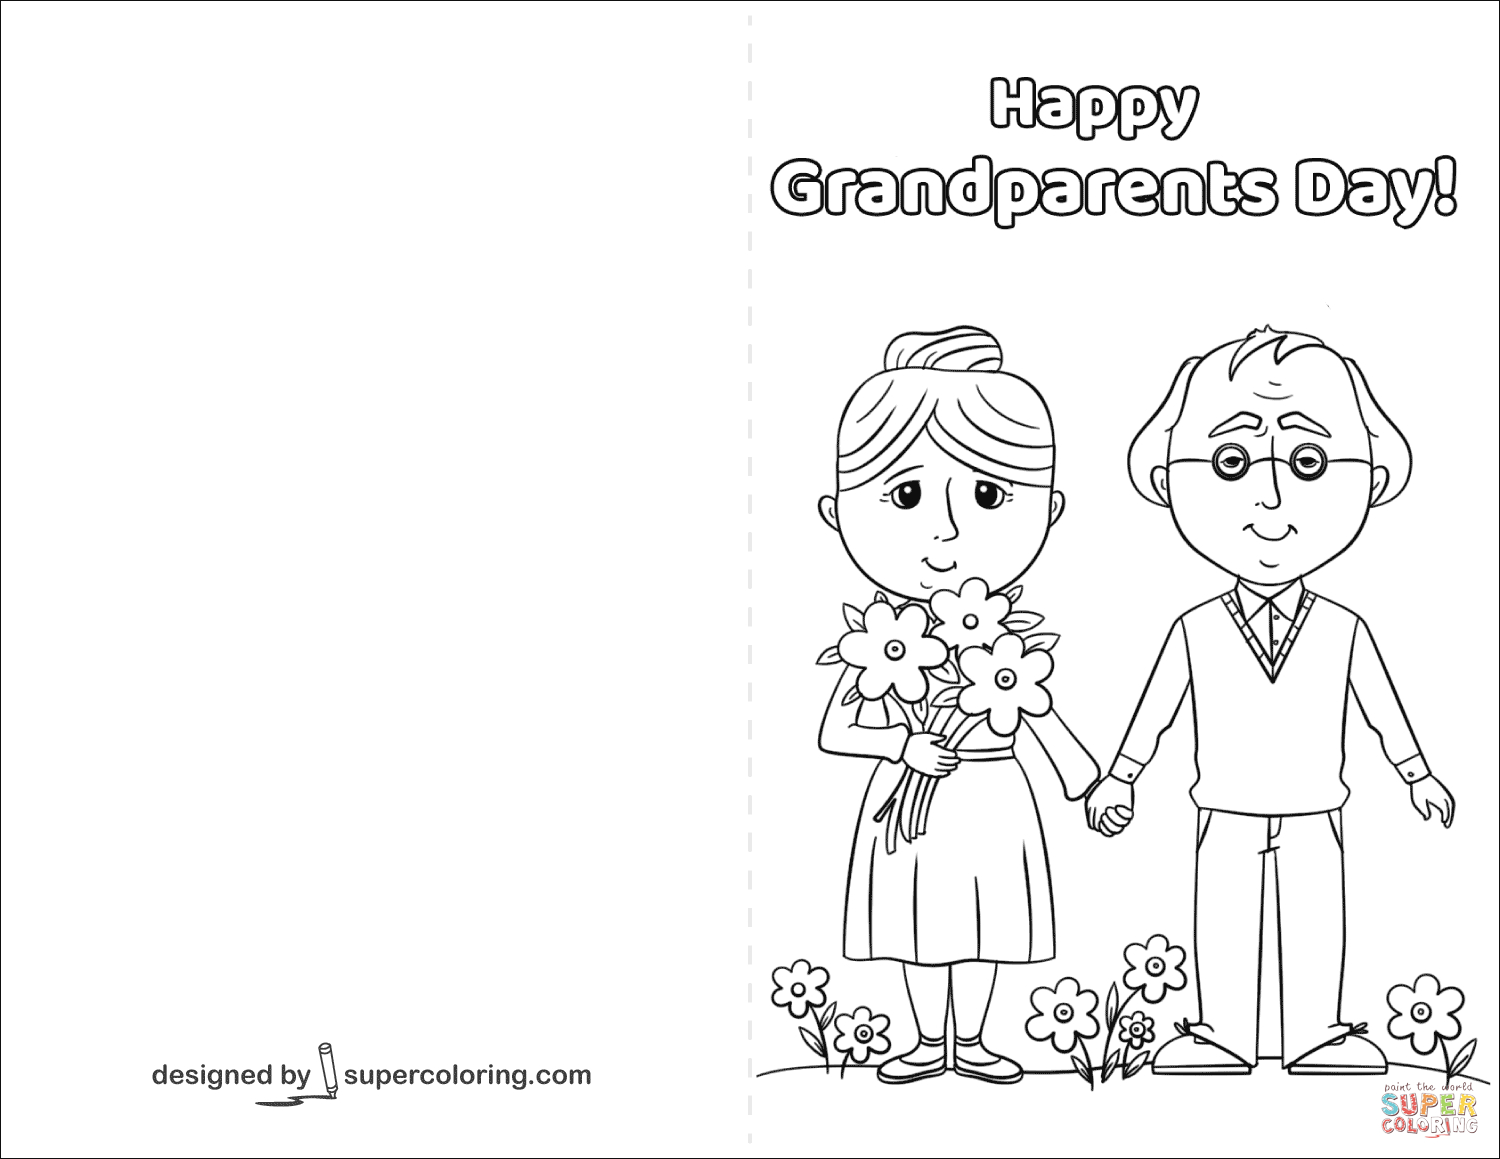 Grandparents Day Cards Printable Free - Free Printable A To Z